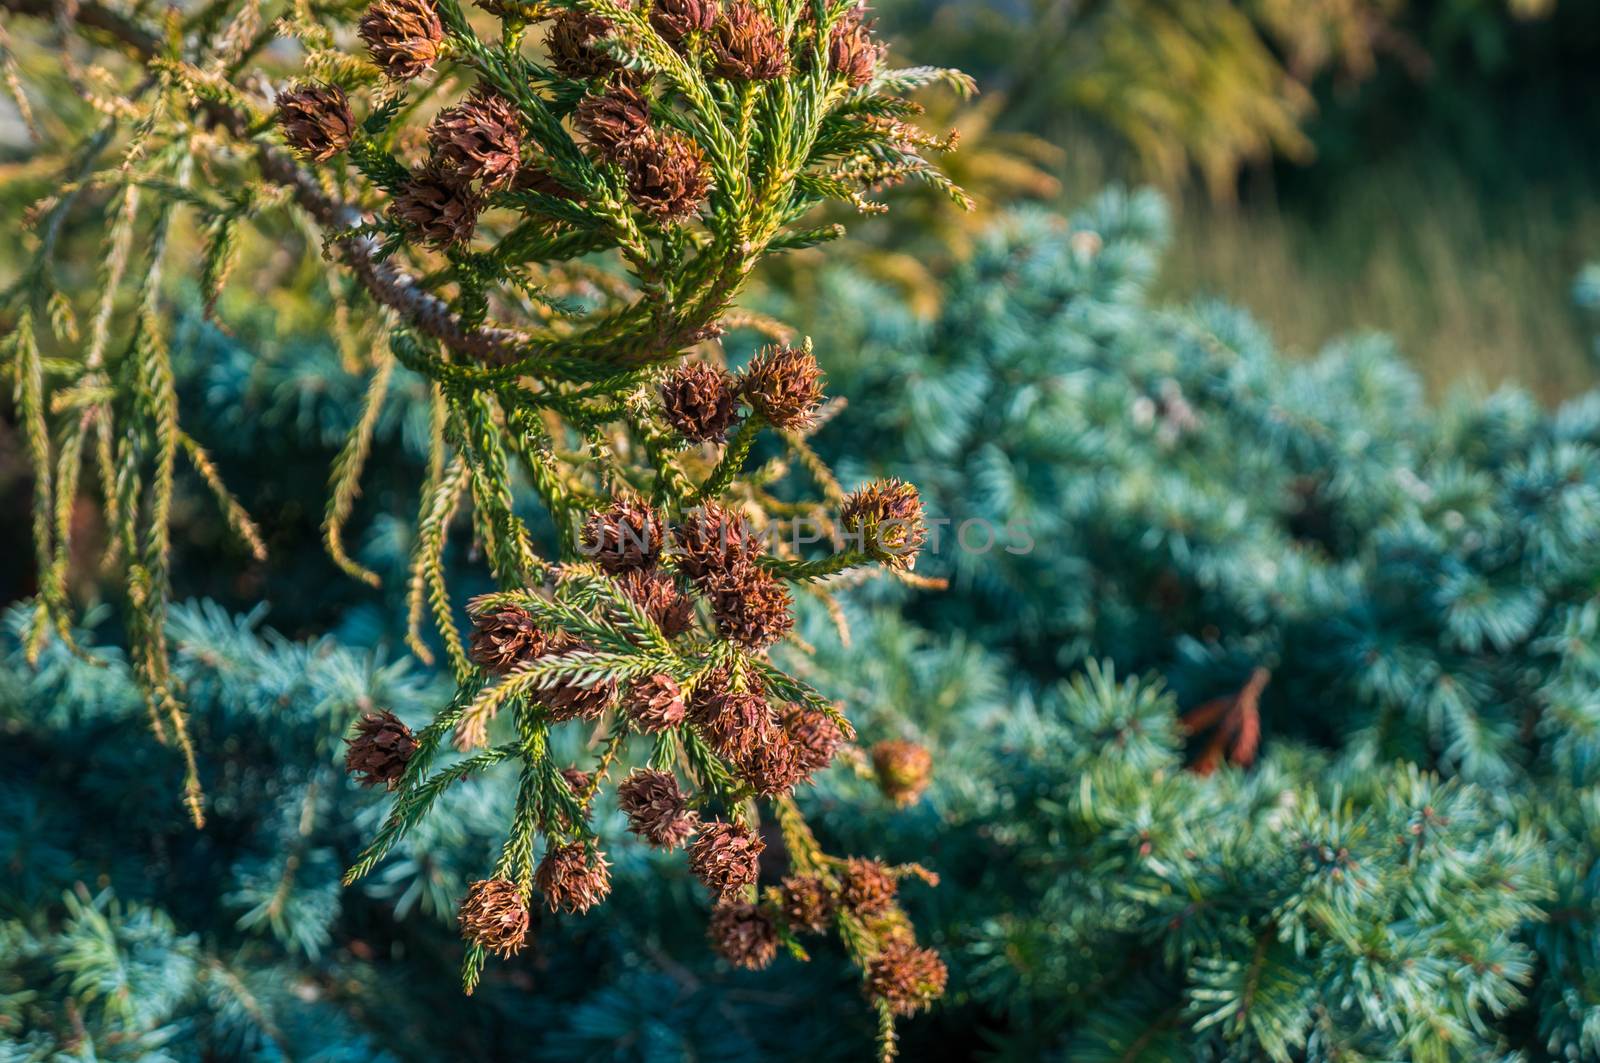 Group of Douglas fir pine cones growing with bright green needles on the branches. Close up photo with silver green conifer in the background. Shot on bright sunlight fall season day.